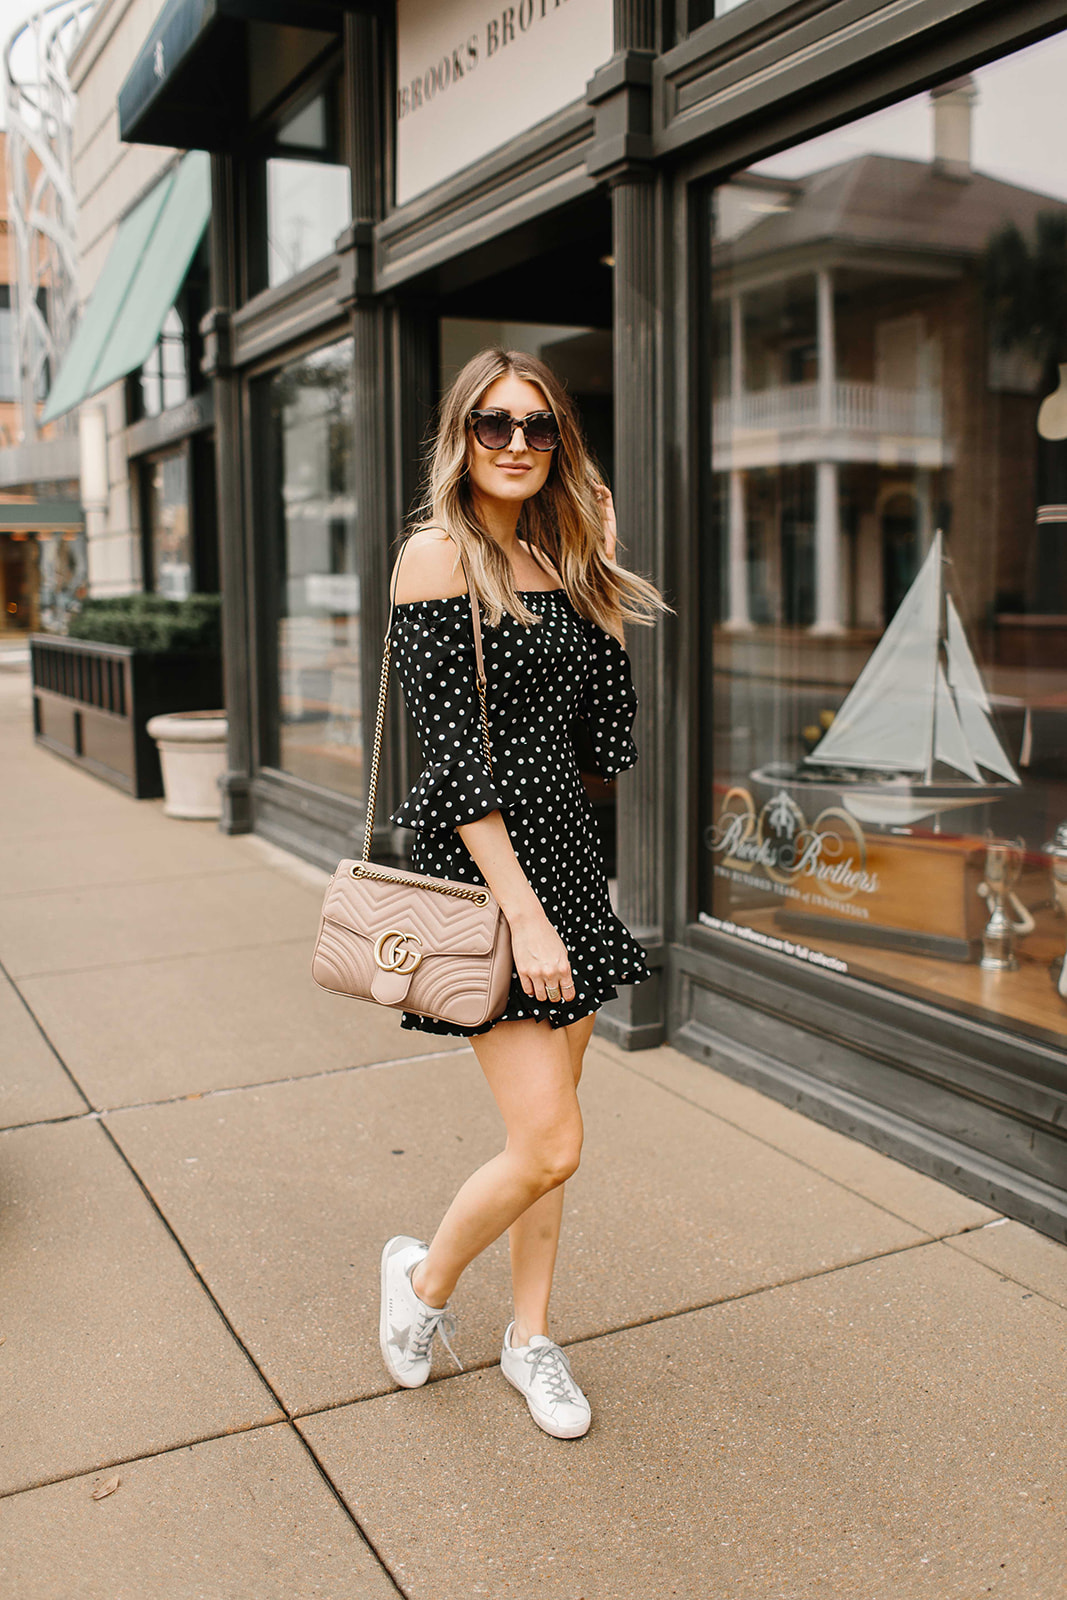 How to Wear Sneakers with Dresses - Merrick's Art | Casual date night  outfit, Dress and sneakers outfit, Stylish summer outfits